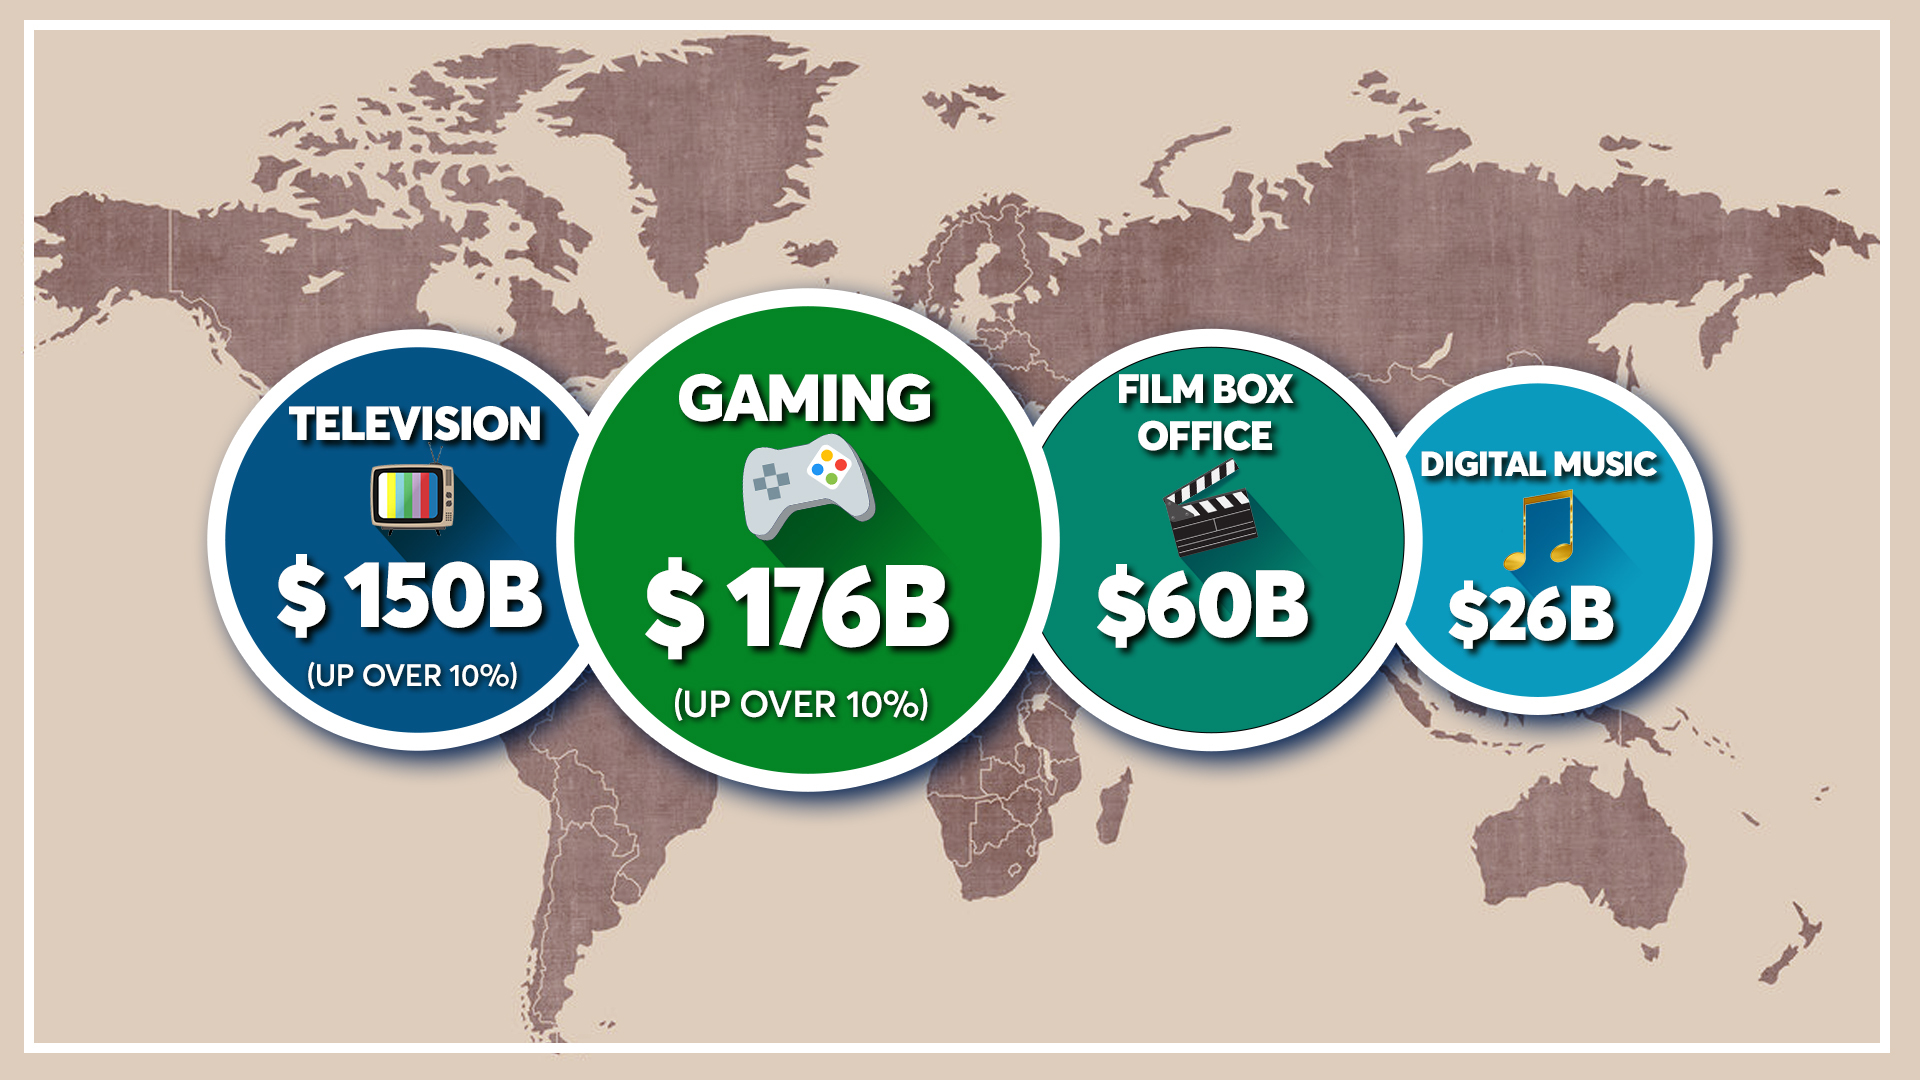 World of Gaming - Global Gaming Industry Stats, Trends and Projections